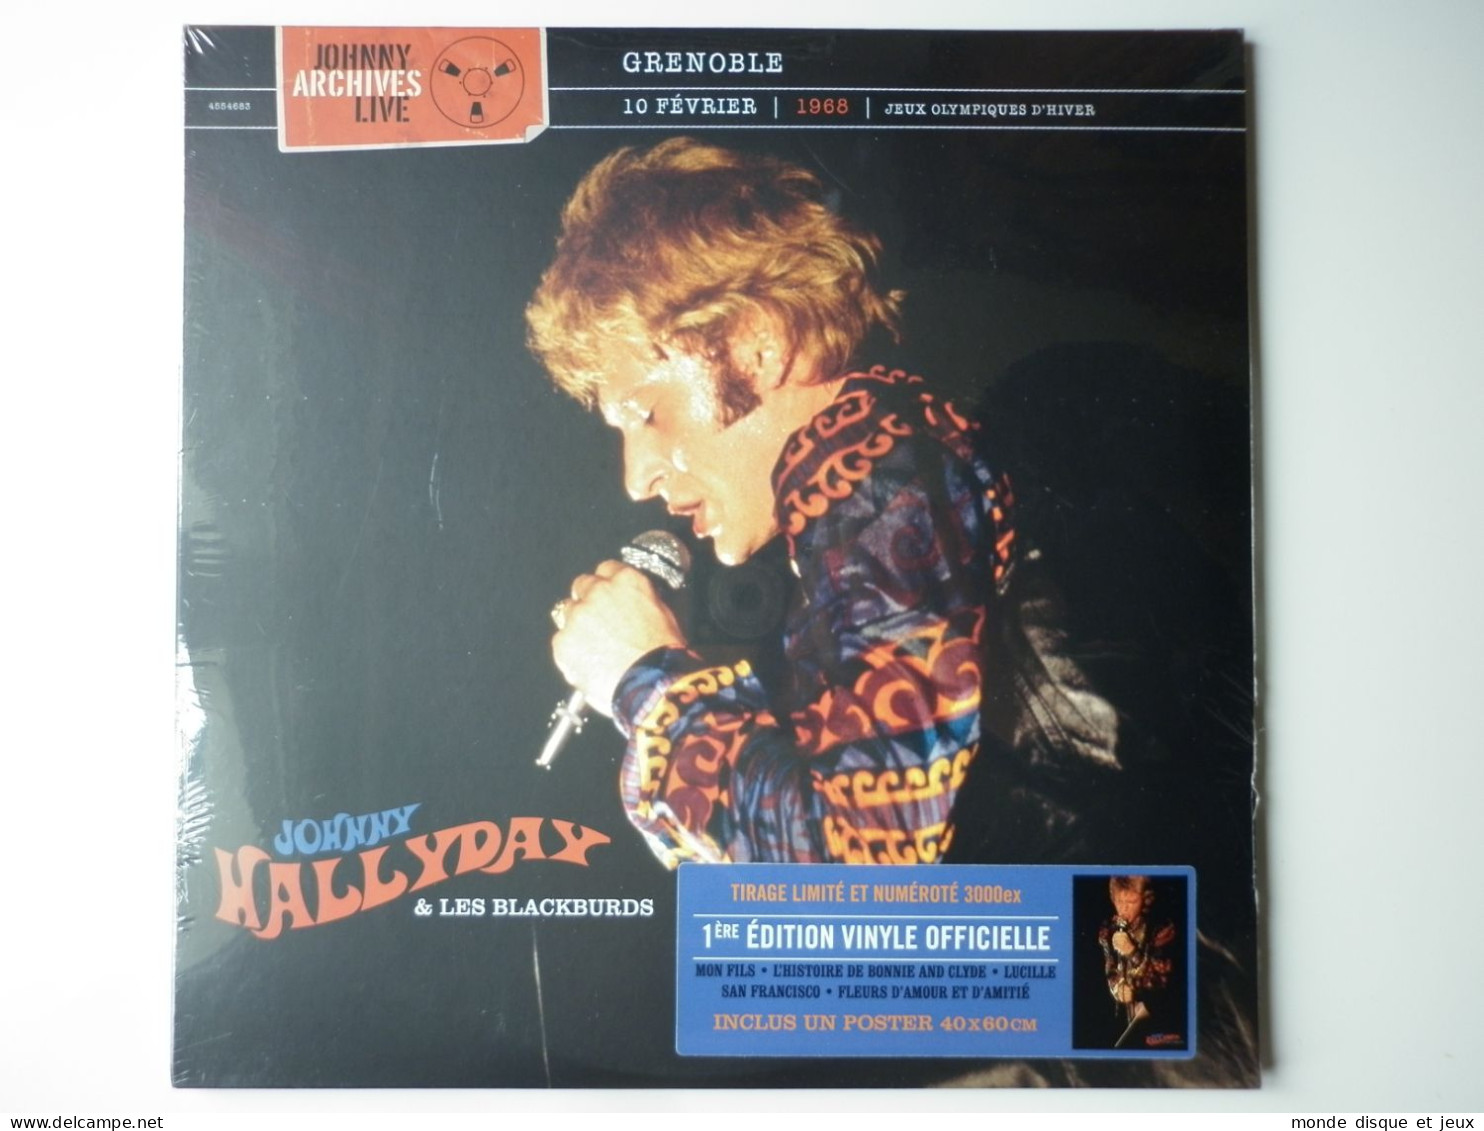 Johnny Hallyday Album Double 33Tours Vinyles Grenoble 10 Février 1968 - Other - French Music